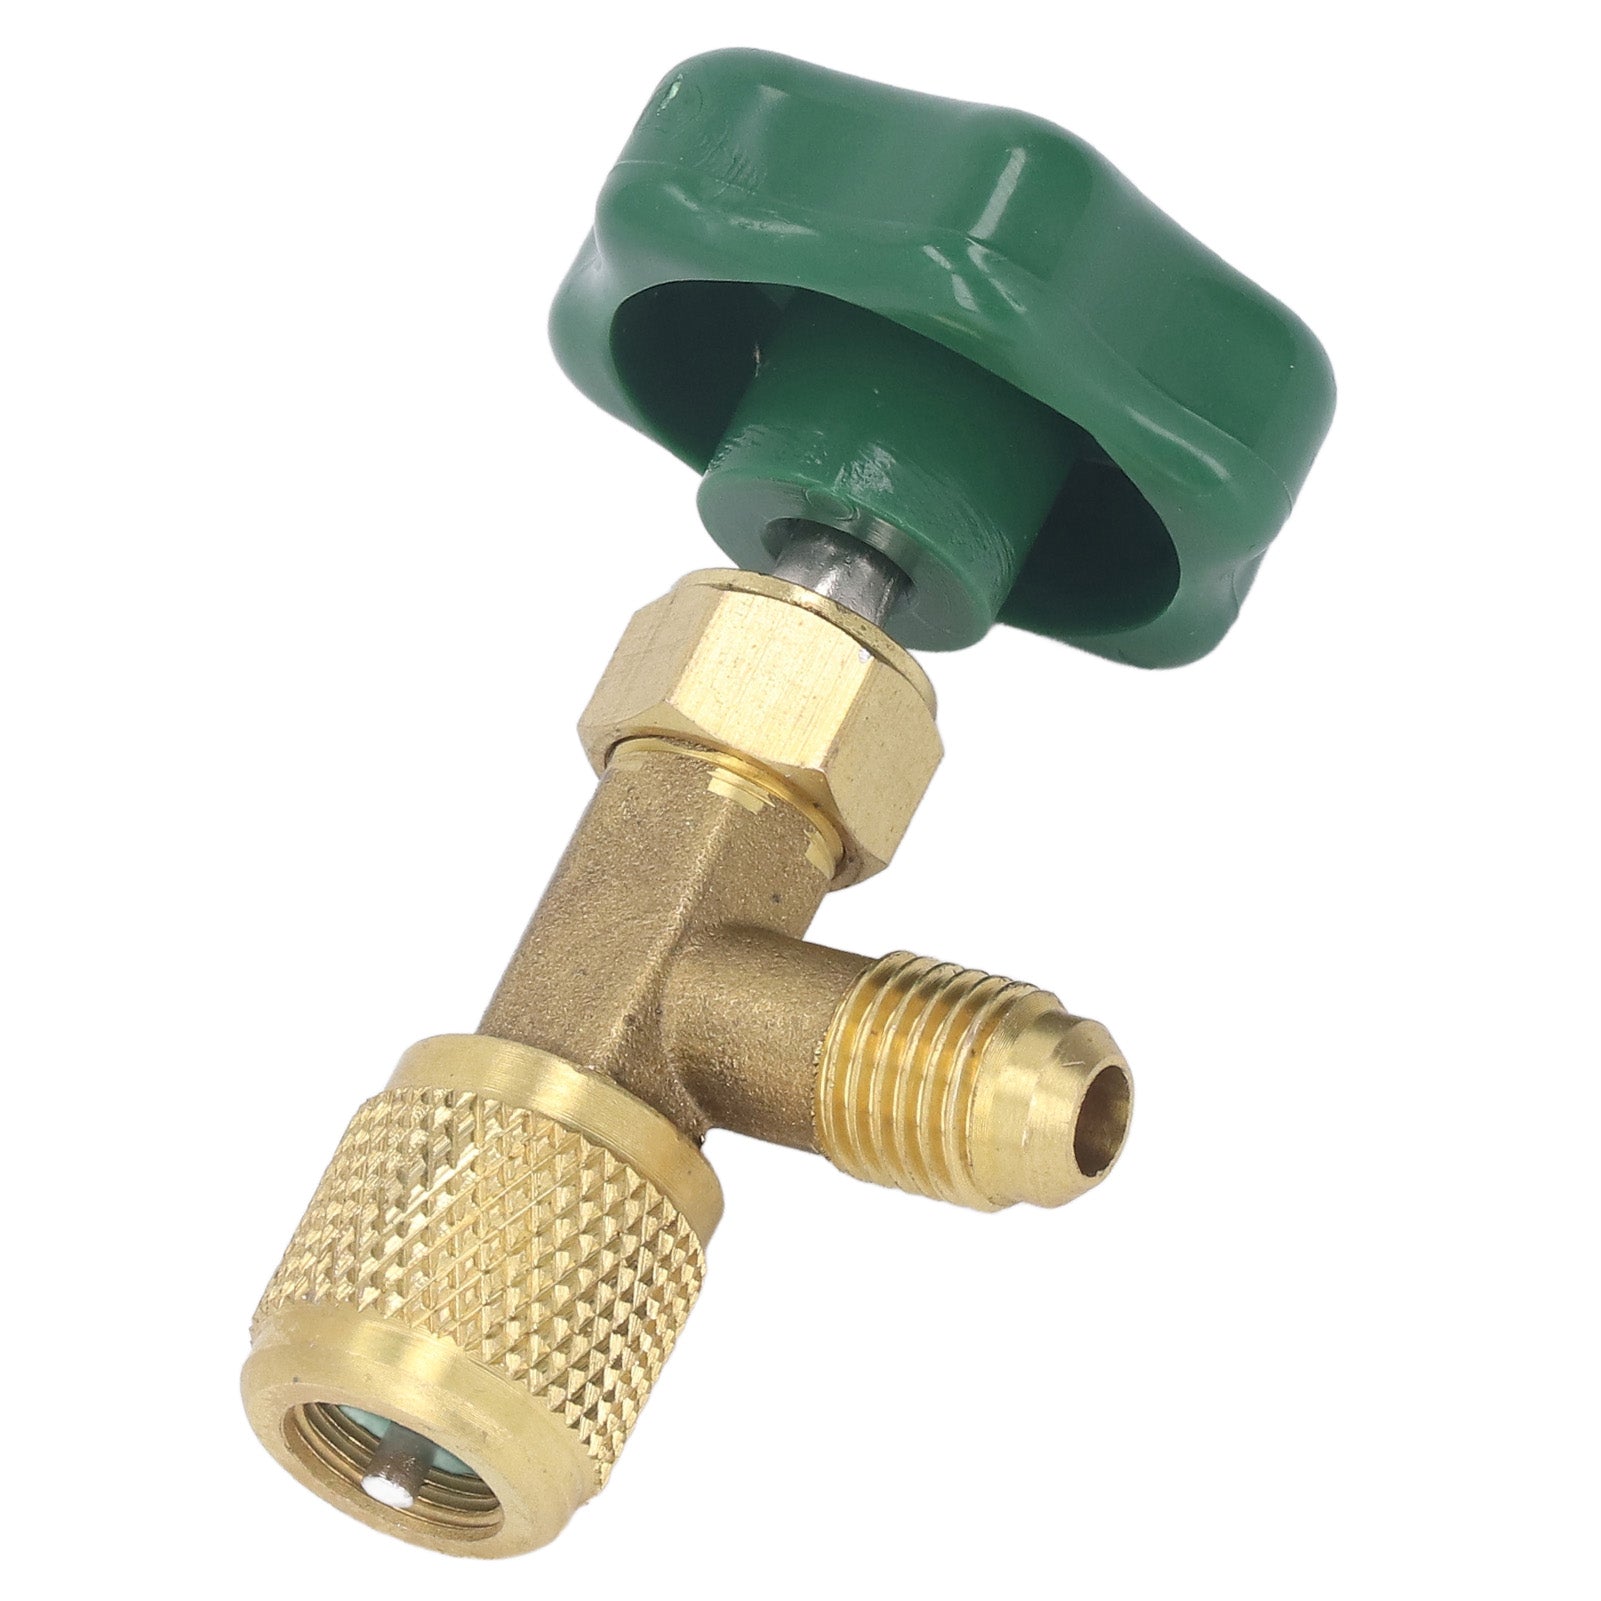 Air Conditioning Refrigerant Valve Copper ABS Leak Proof 1/4in SAE Refrigerant Tank Valve for Replacement